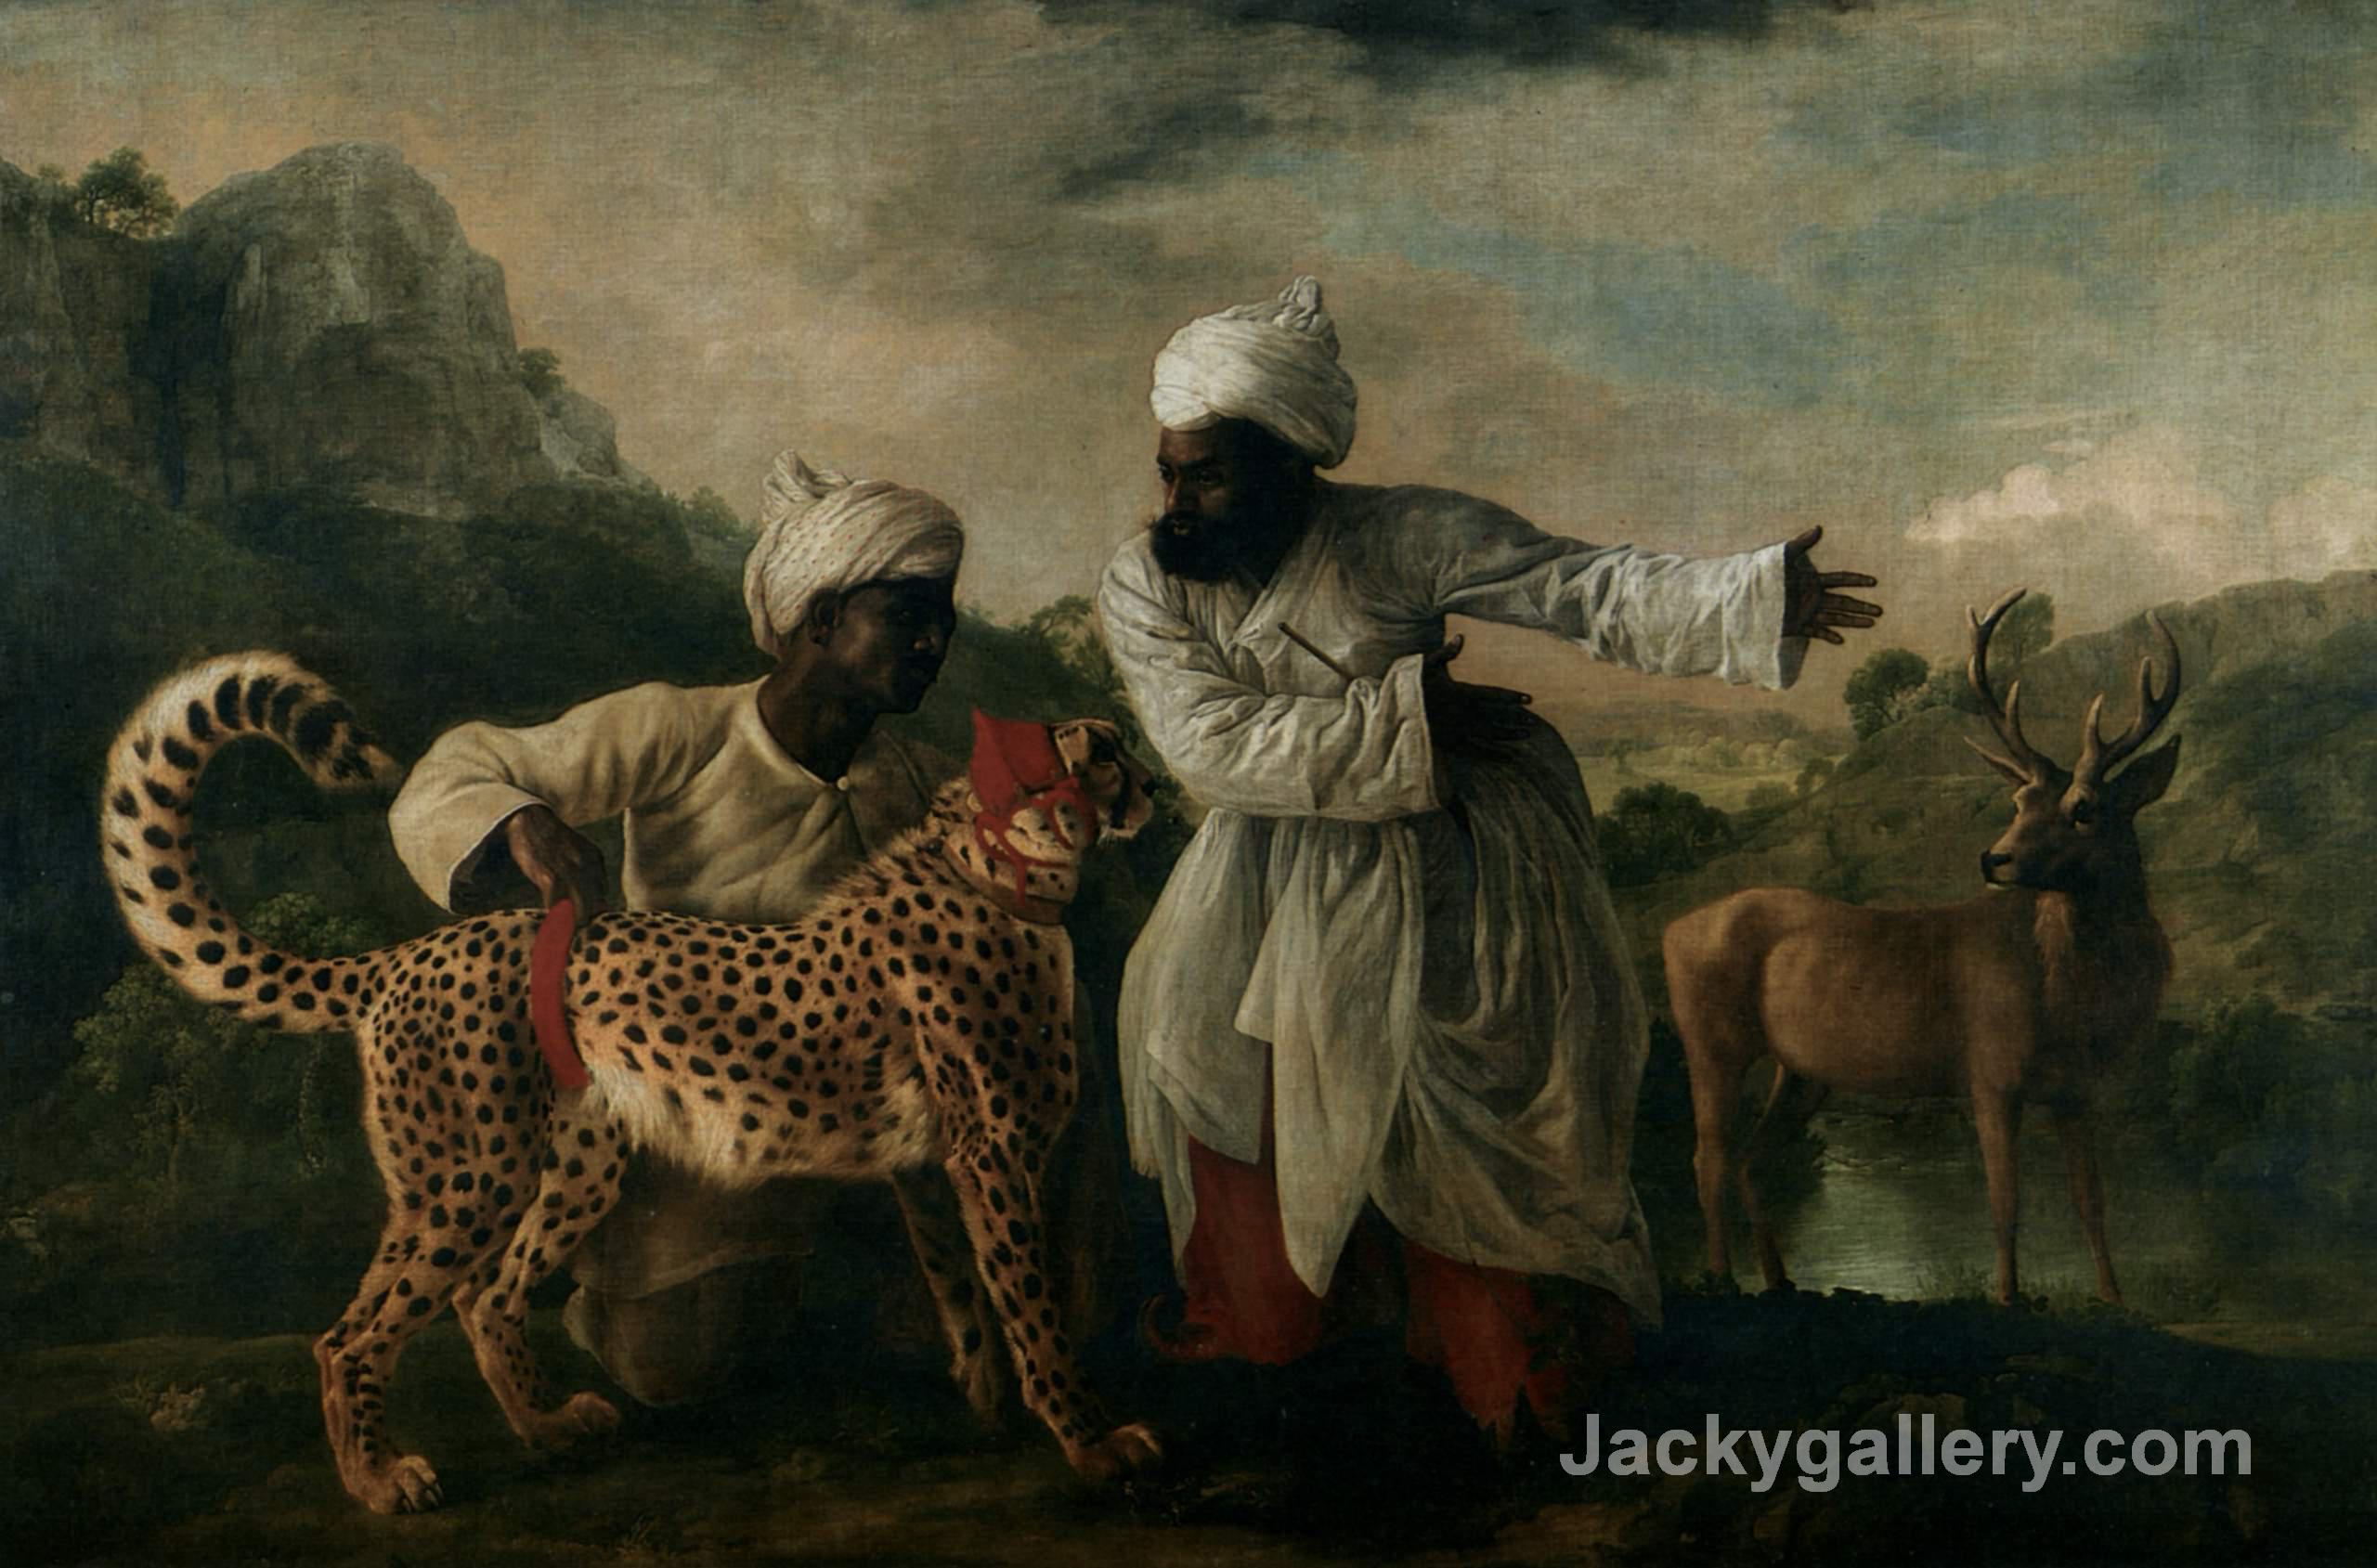 Cheetah With Two Indian Servants And A Deer by George Stubbs paintings reproduction